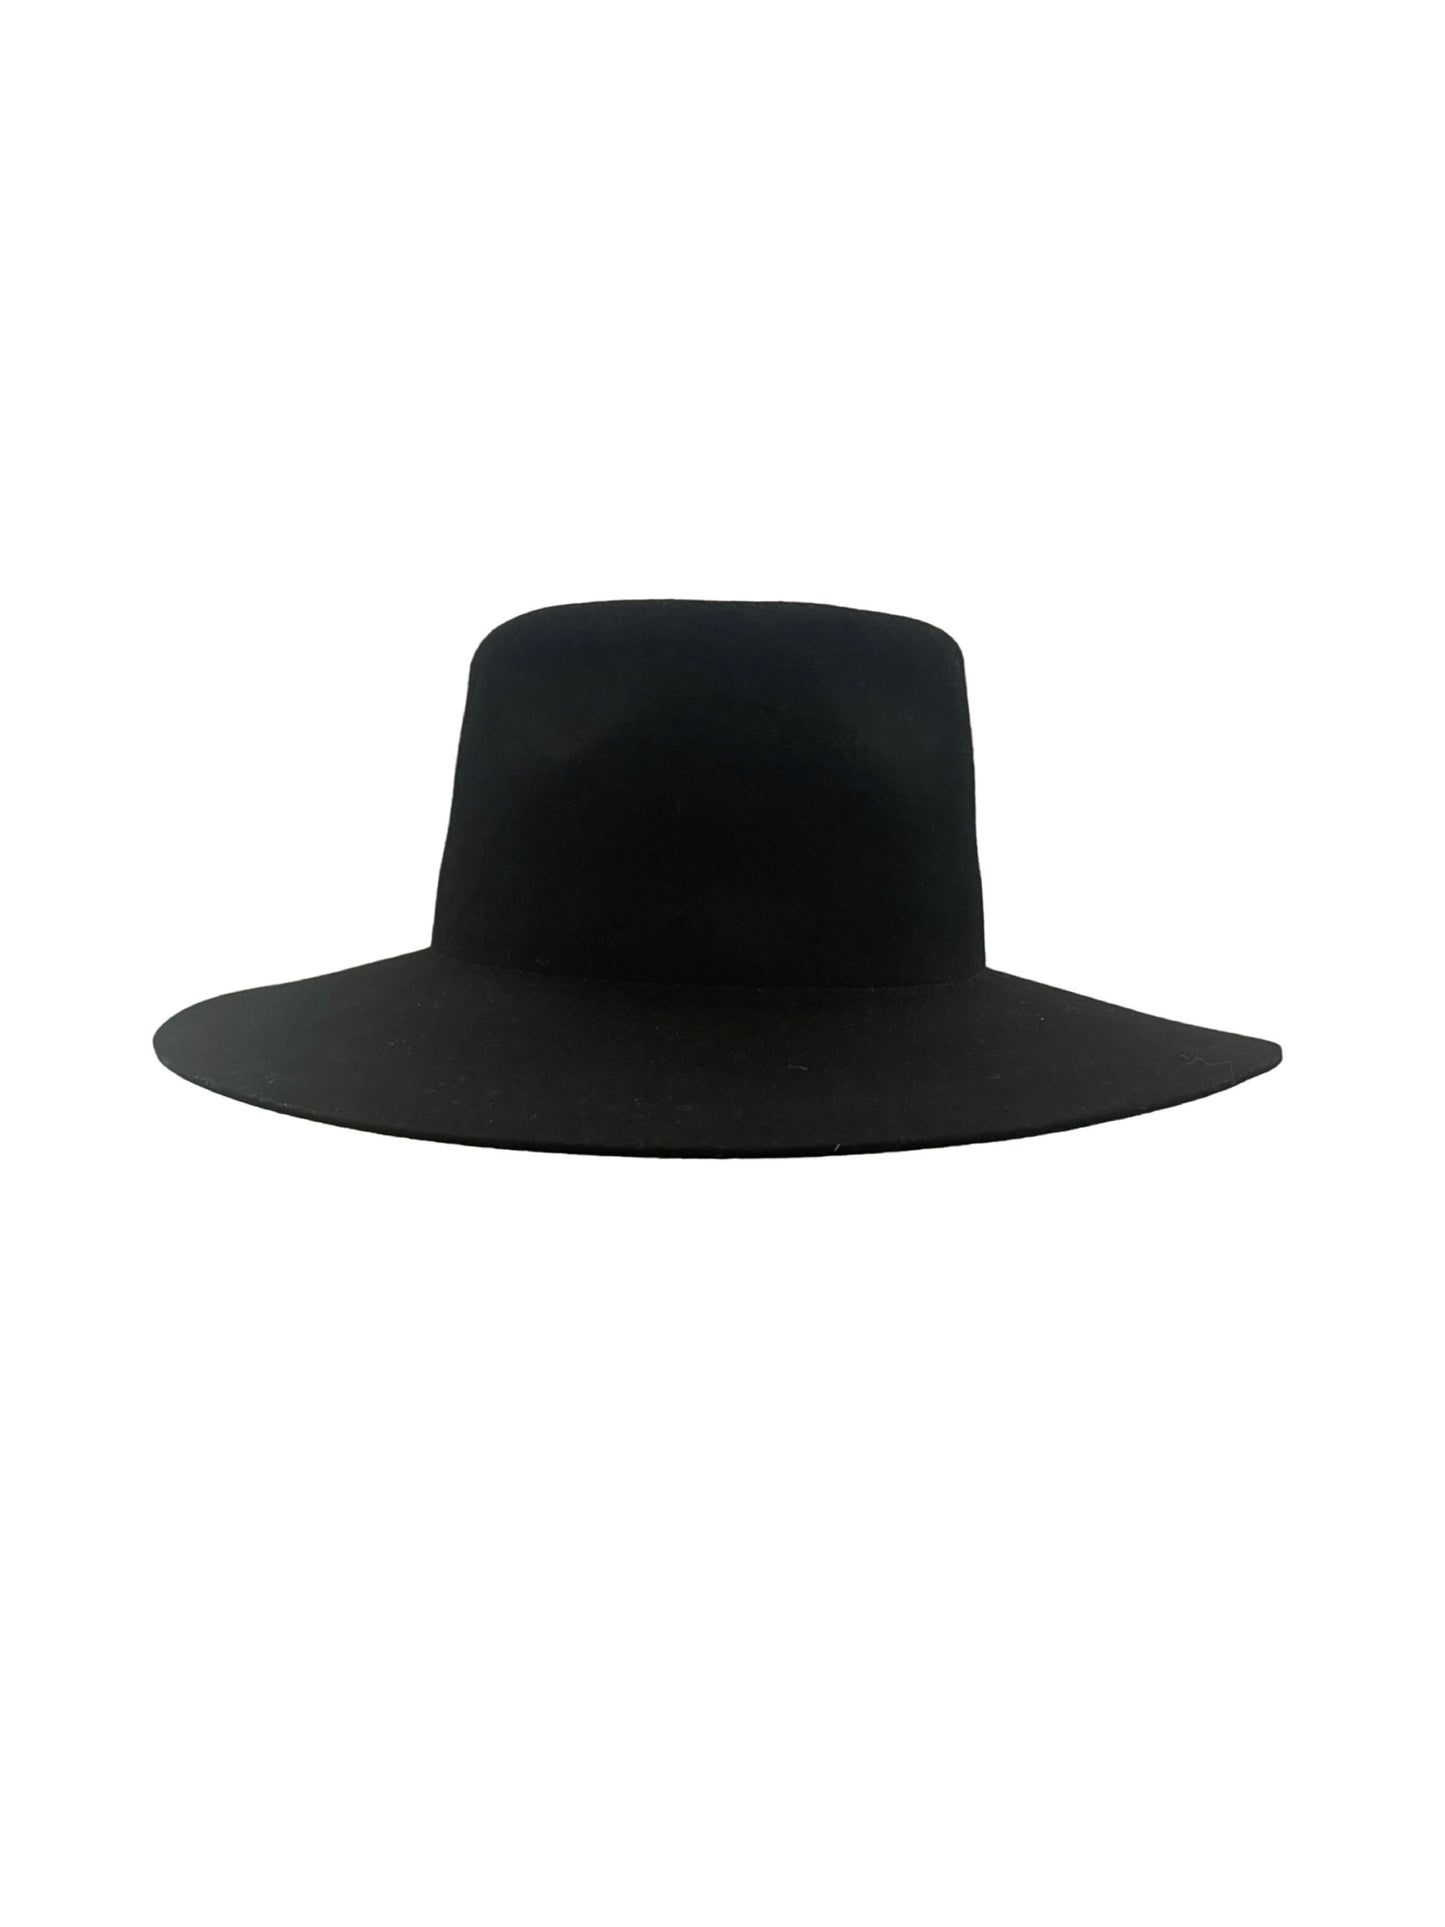 the fedora hat black front